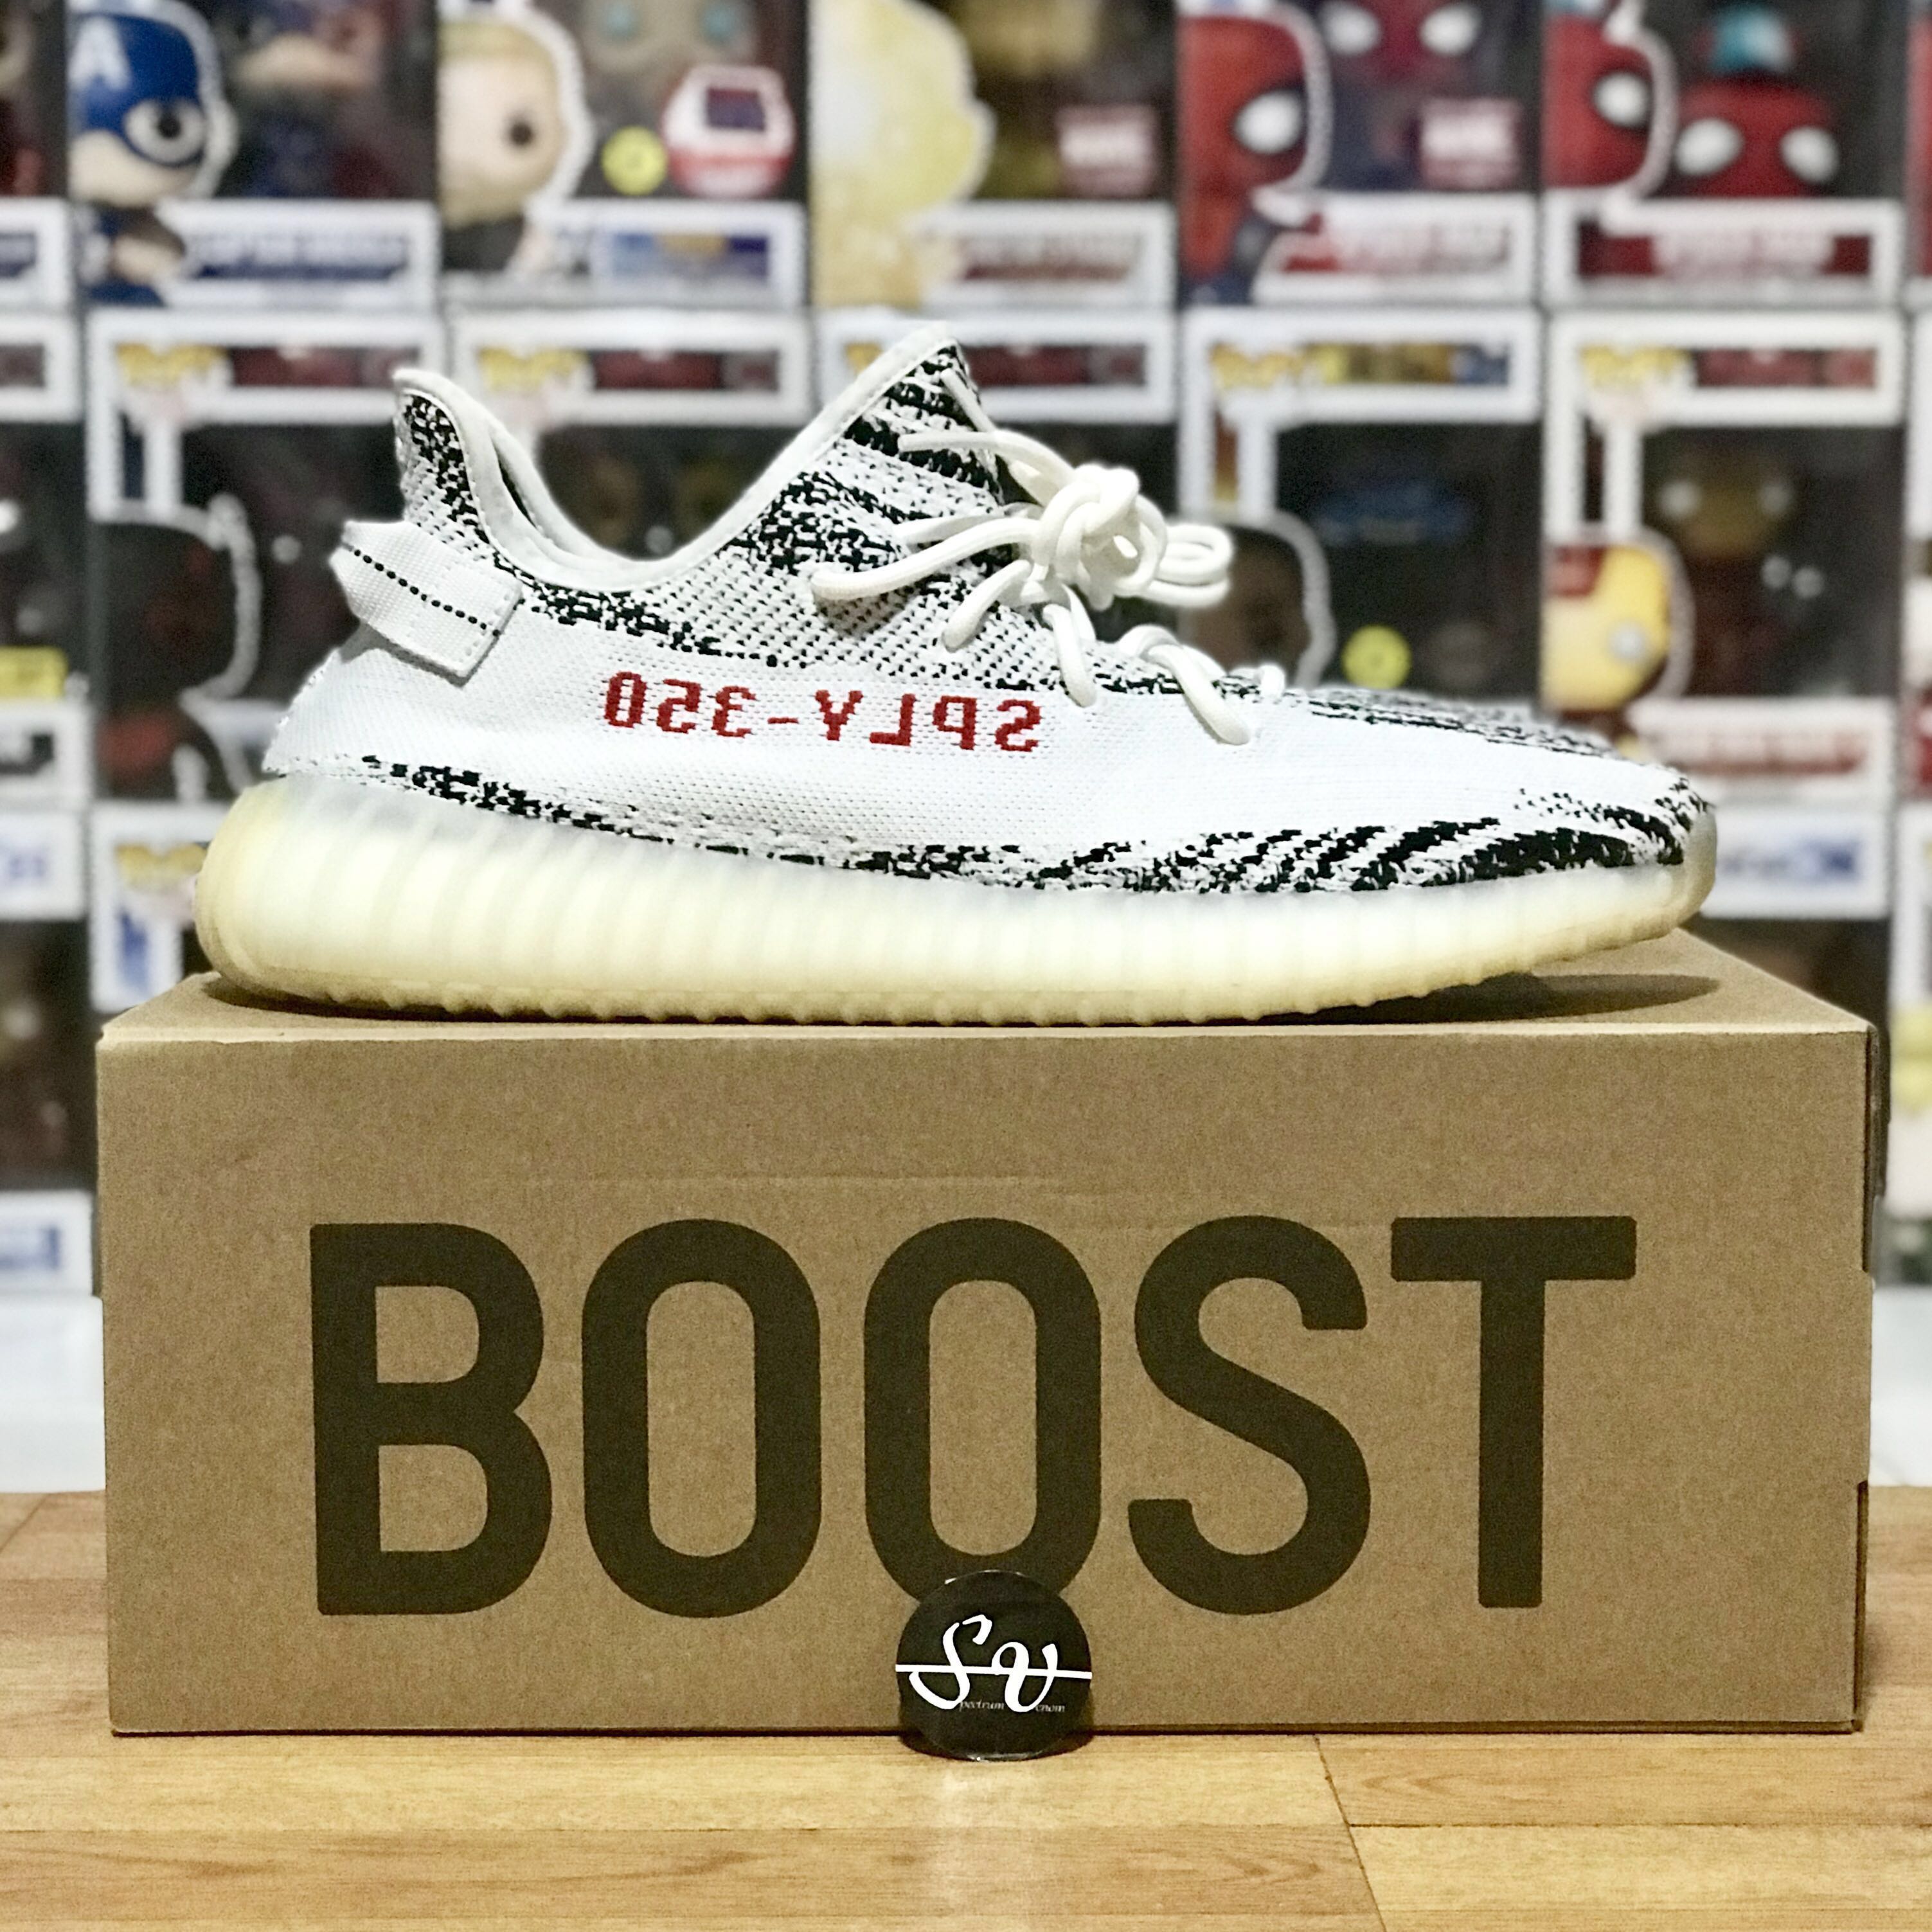 Vreemdeling blok Scheiden Adidas Originals Yeezy Boost 350 V2 Zebra By Kanye West, Core Black / White Limited  Edition Sneaker not supreme, off white, Men's Fashion, Footwear, Sneakers  on Carousell